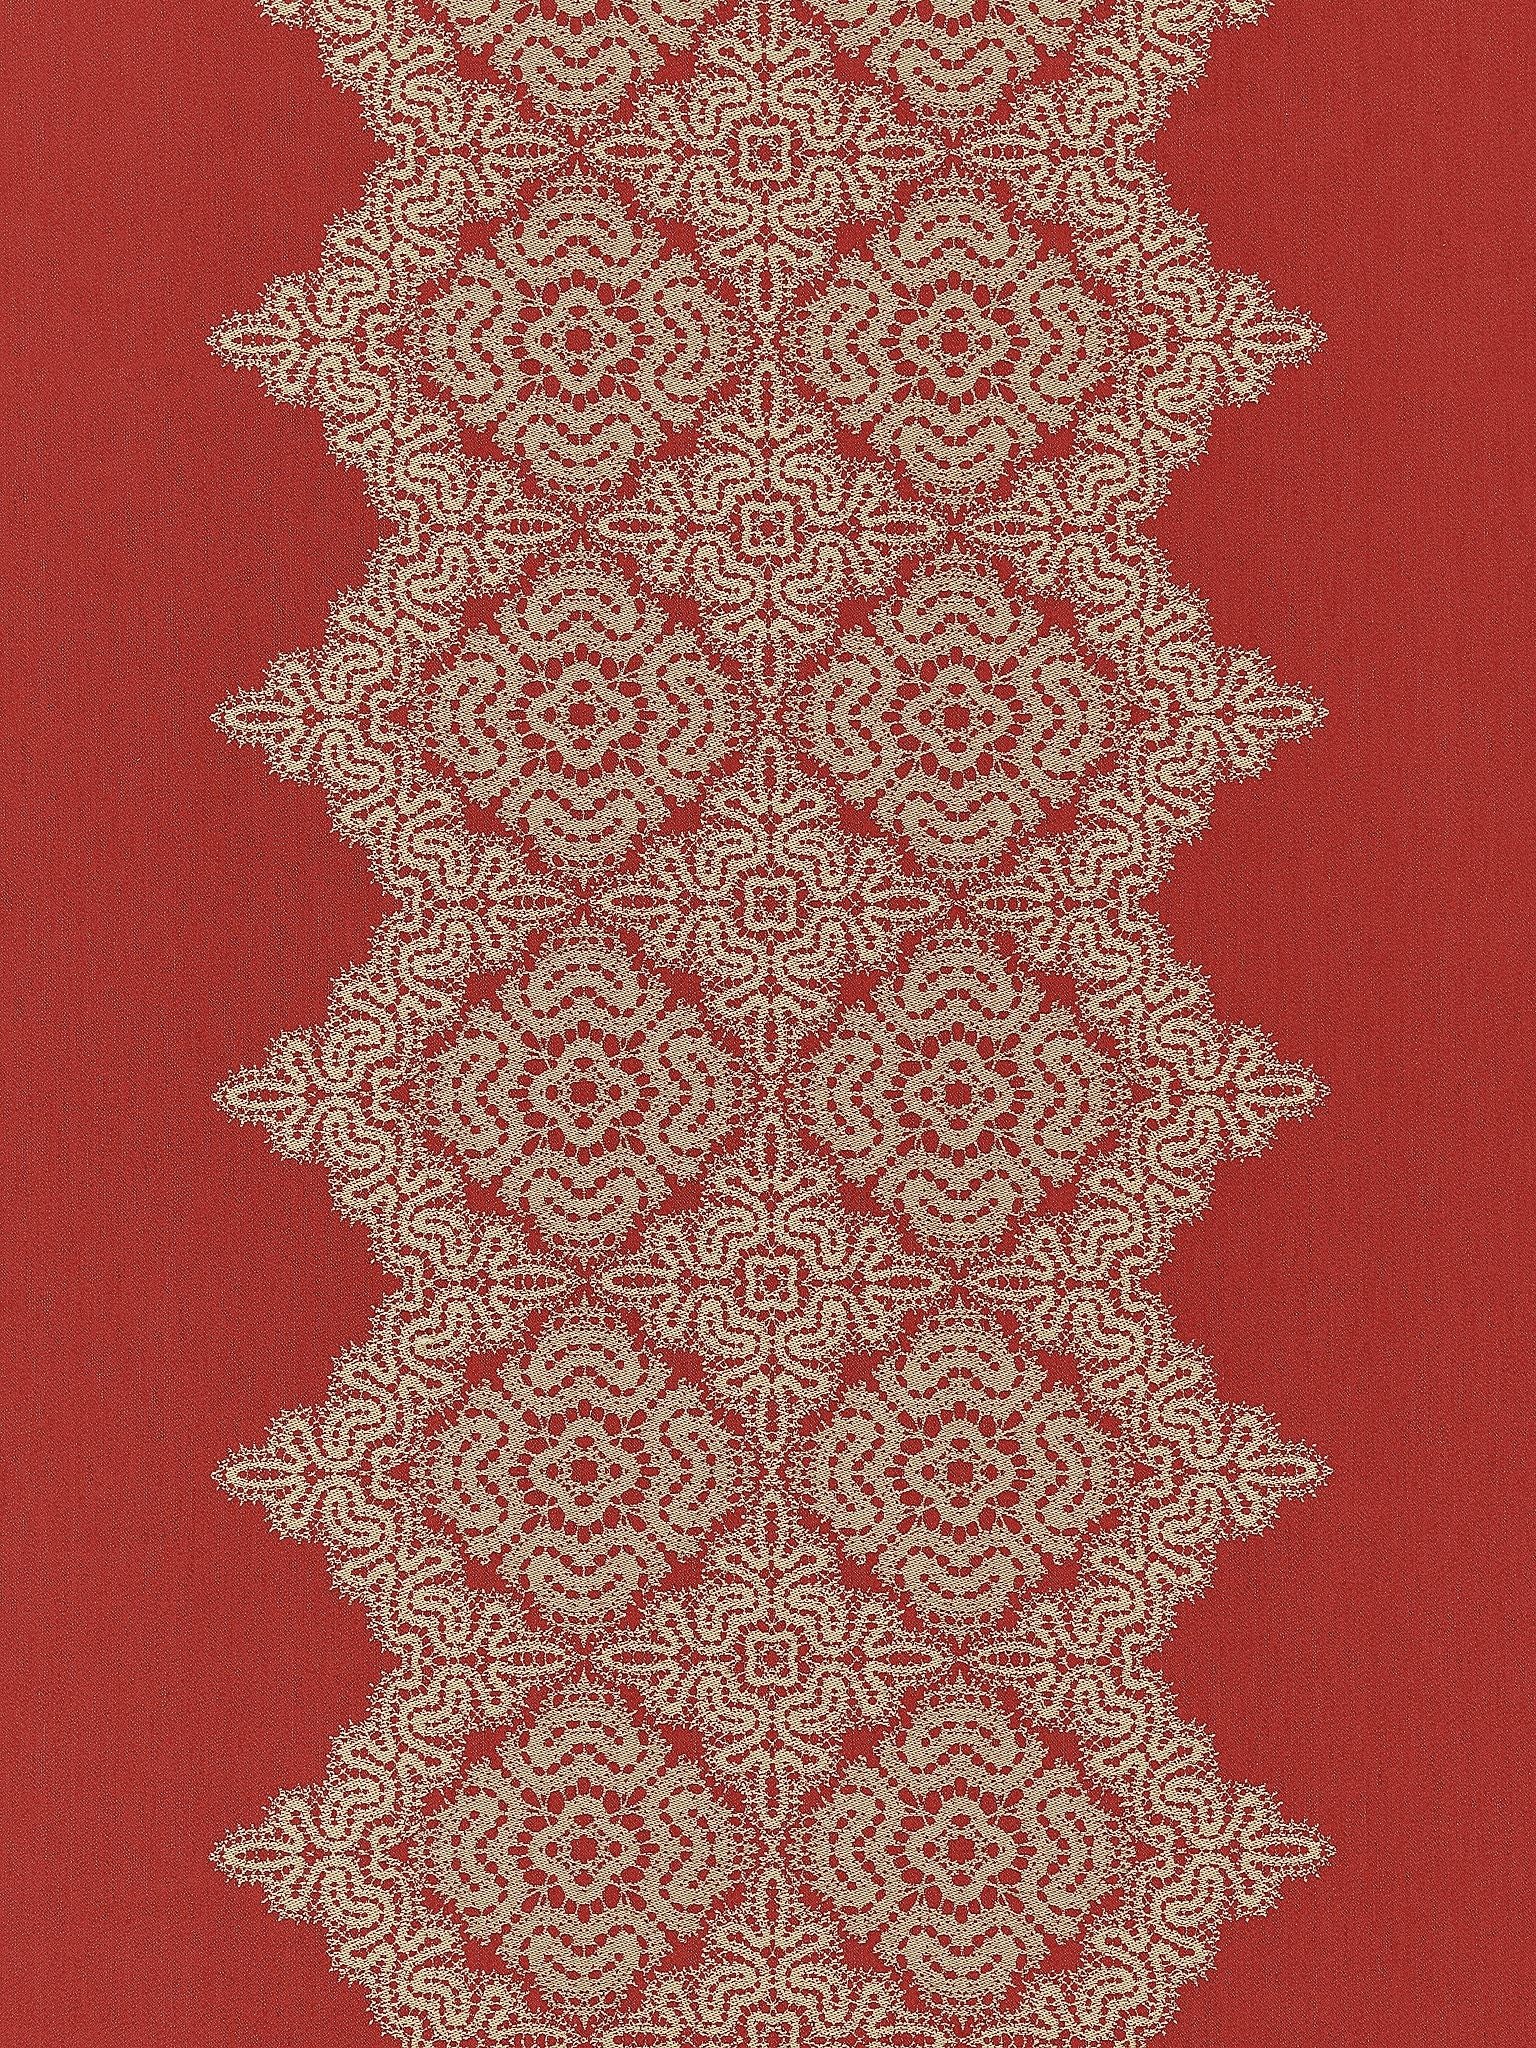 Josephine fabric in carnelian color - pattern number SC 000327168 - by Scalamandre in the Scalamandre Fabrics Book 1 collection